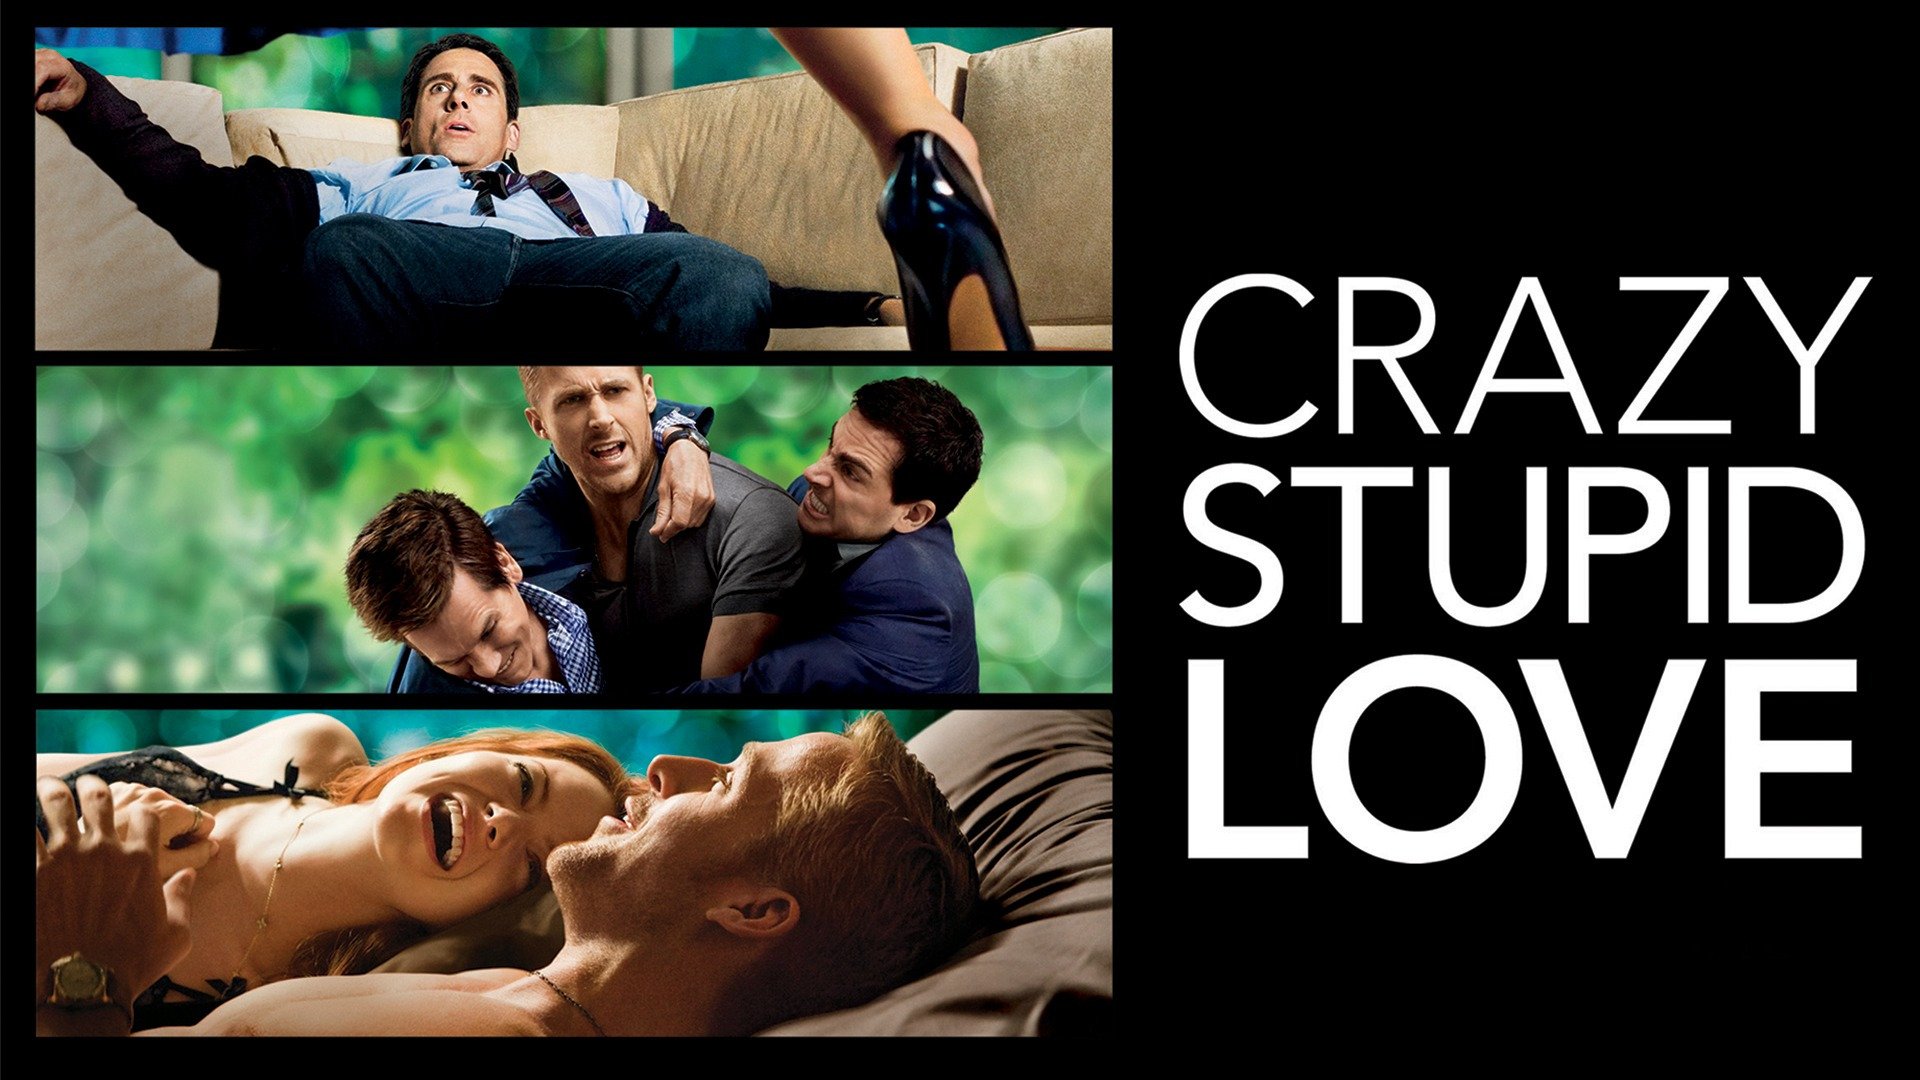 Steve Carell has a wingman in 'Crazy, Stupid, Love